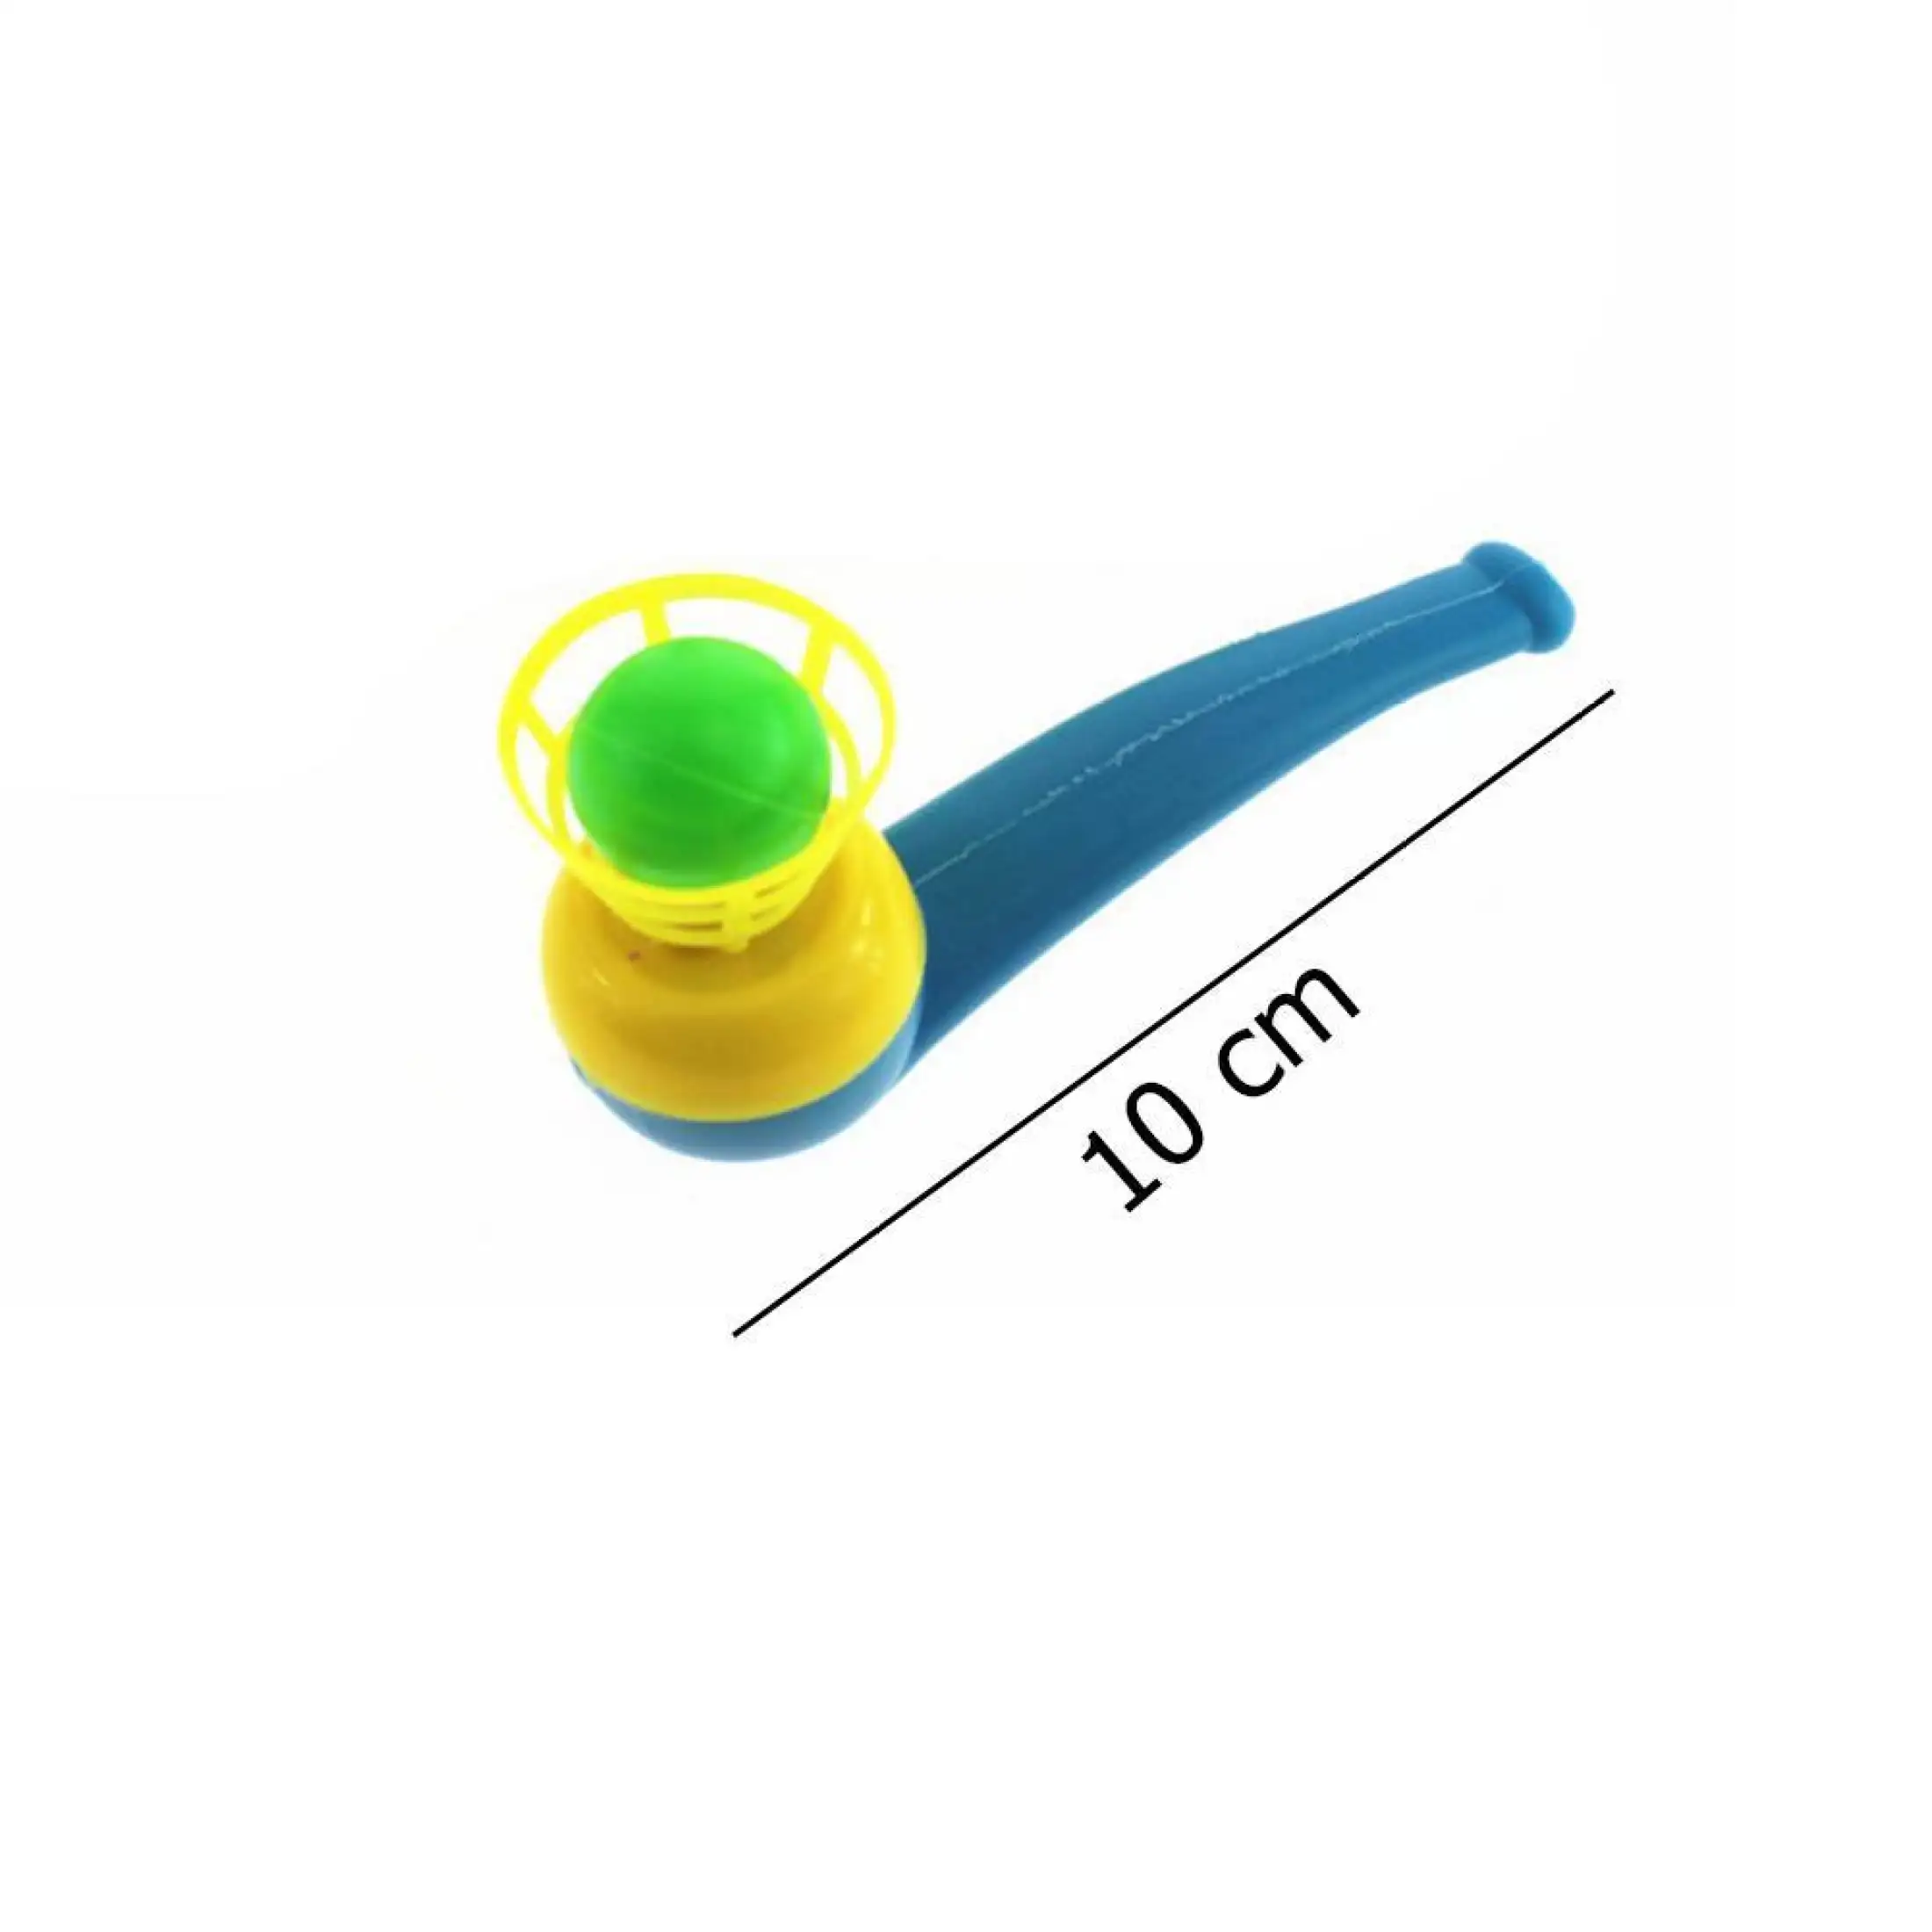 Details about  / Blow Ball Outdoor Kids Gift Interactive Plastic Color Random Classic Toys